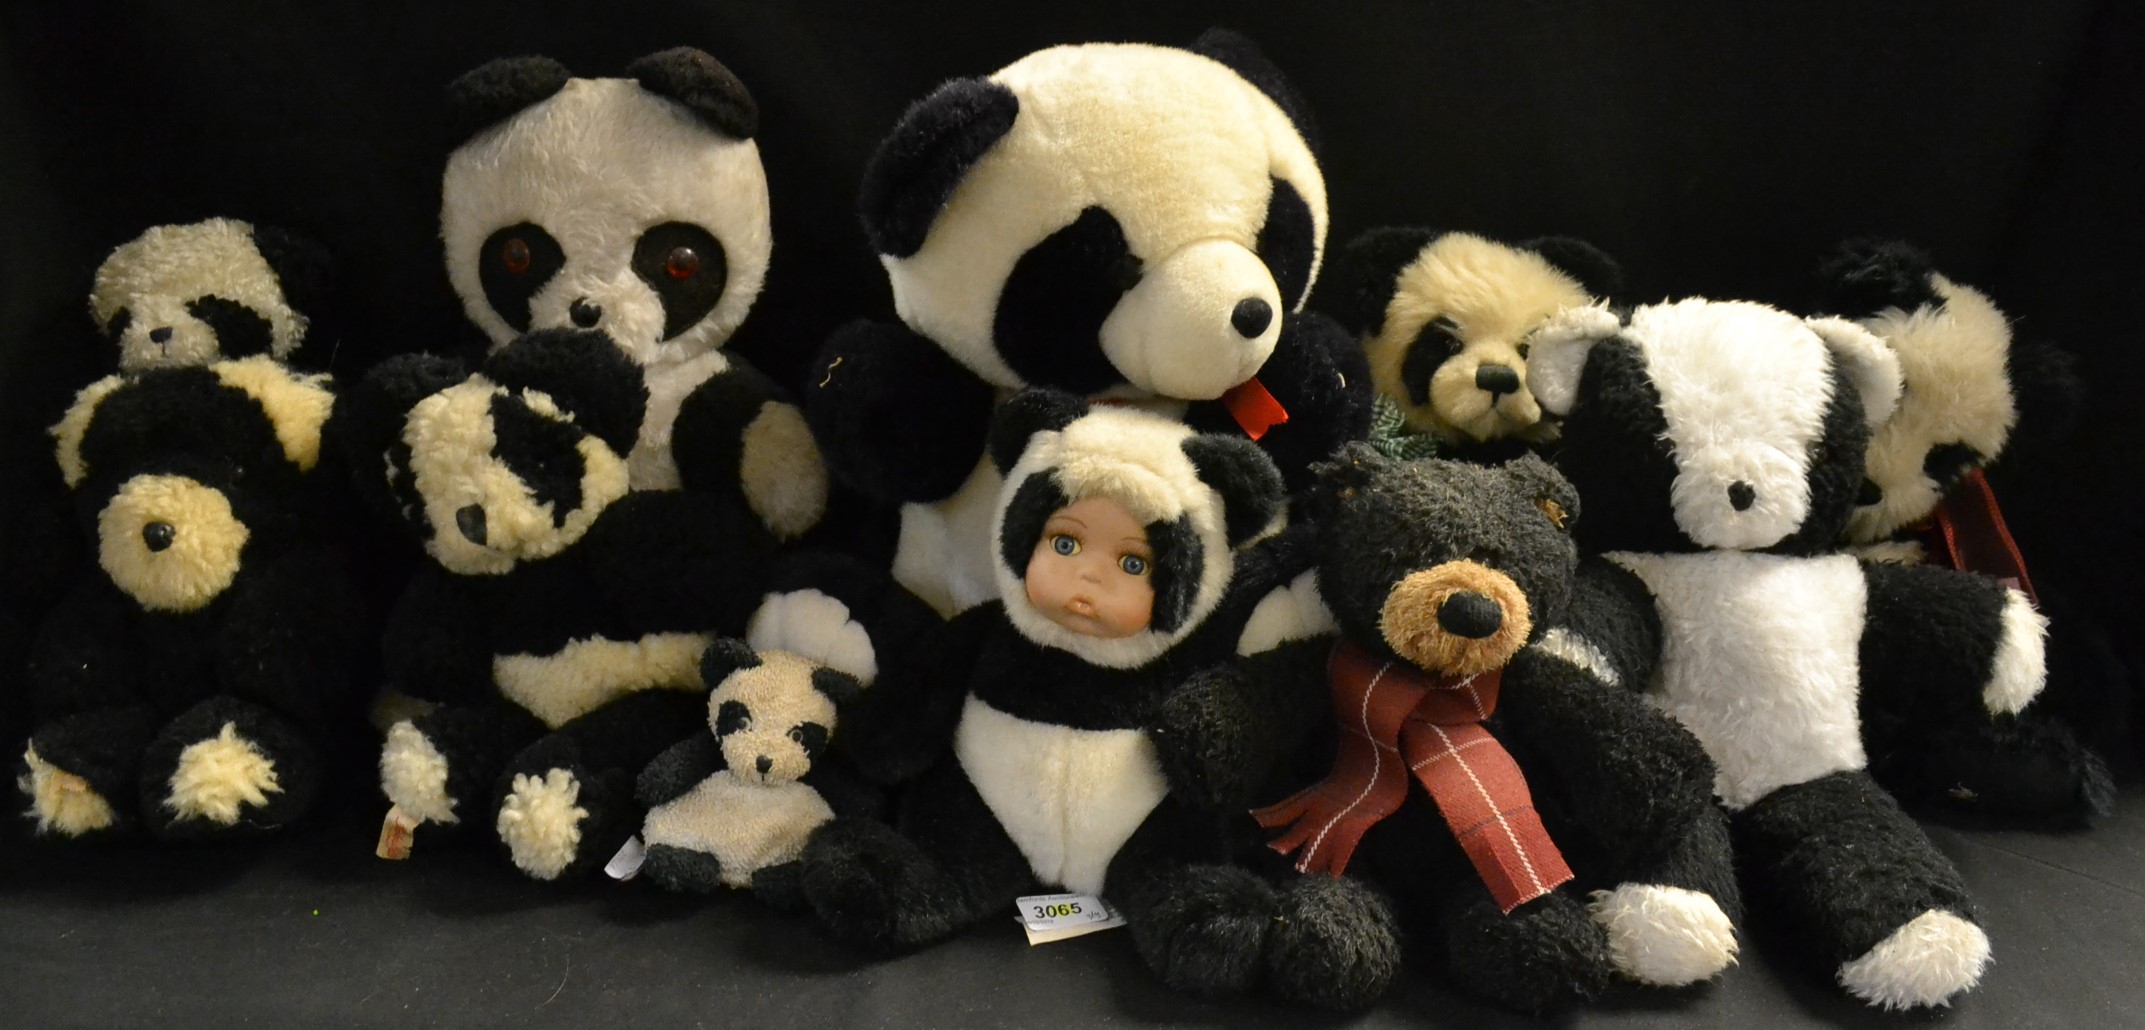 Stuffed Toys - Panda and other bears - a Charlie bears Poppy; others Ganz Cottage Collectable's,